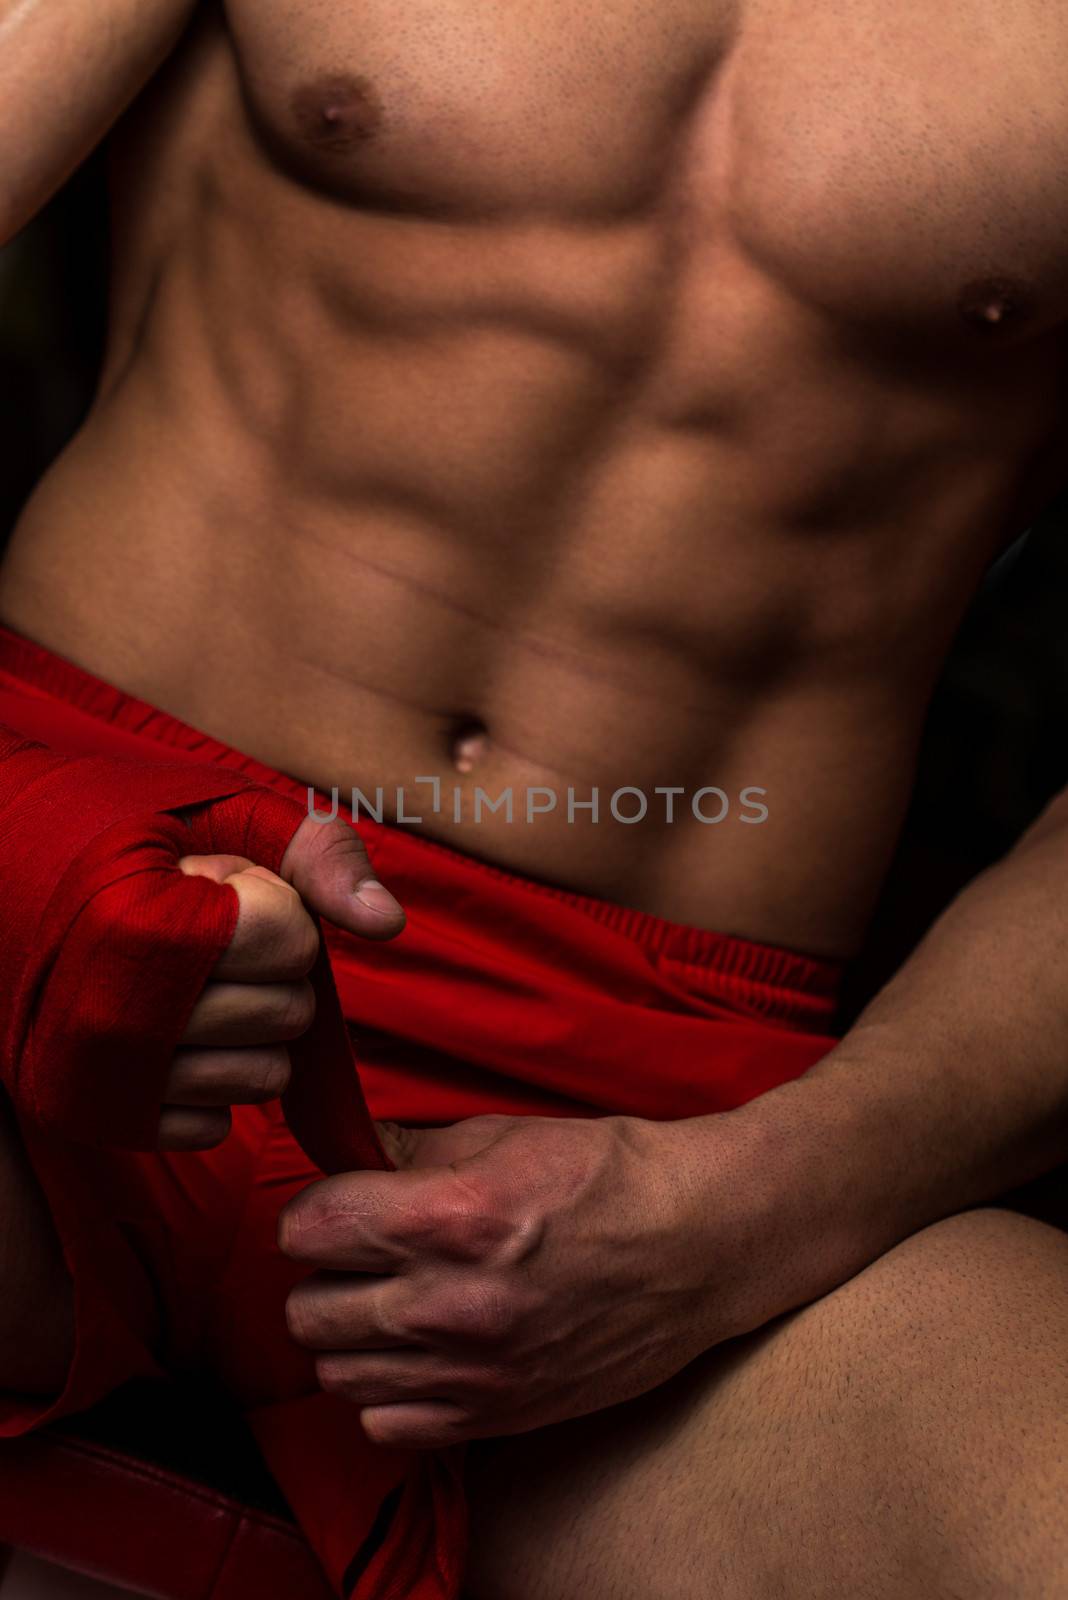 Kick Boxer Getting Ready by JalePhoto